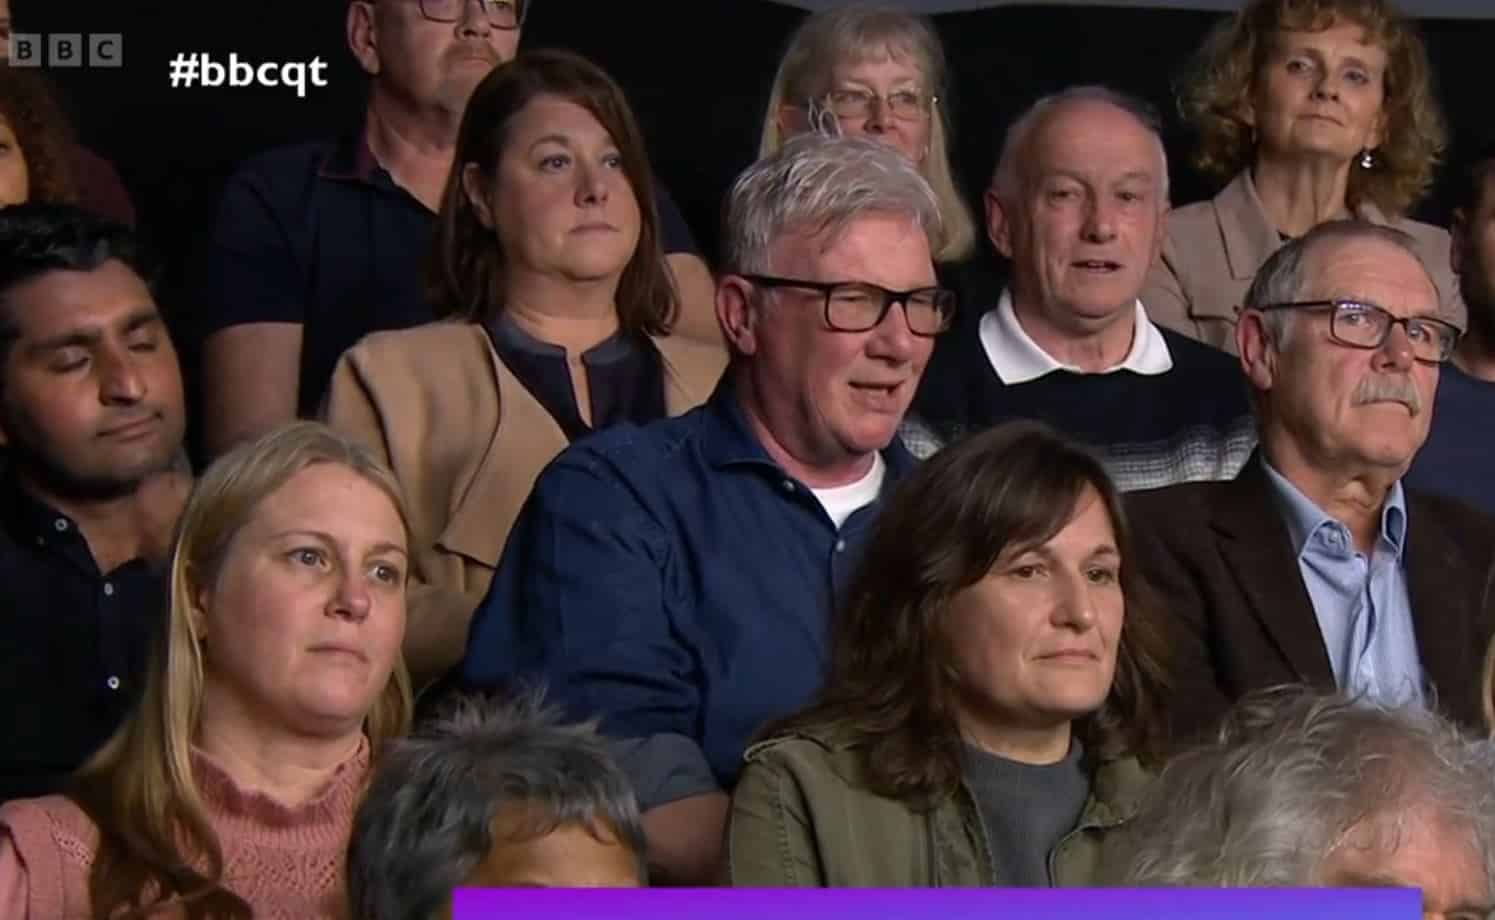 ‘You take us for mugs’: Tory gets destroyed for not answering question on #BBCQT